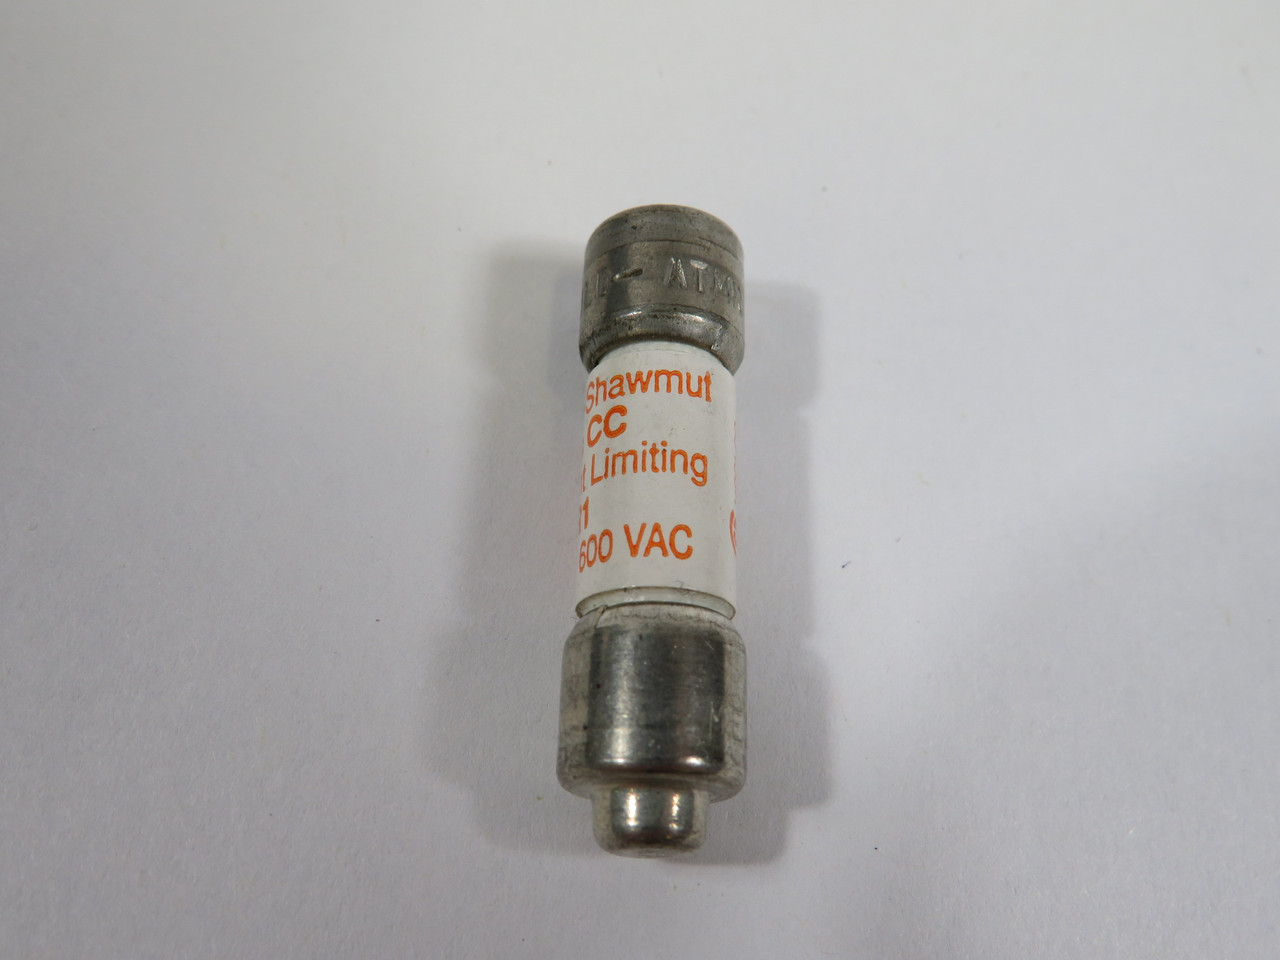 Gould Shawmut ATMR1 Current-Limiting Fuse 1A 600V USED